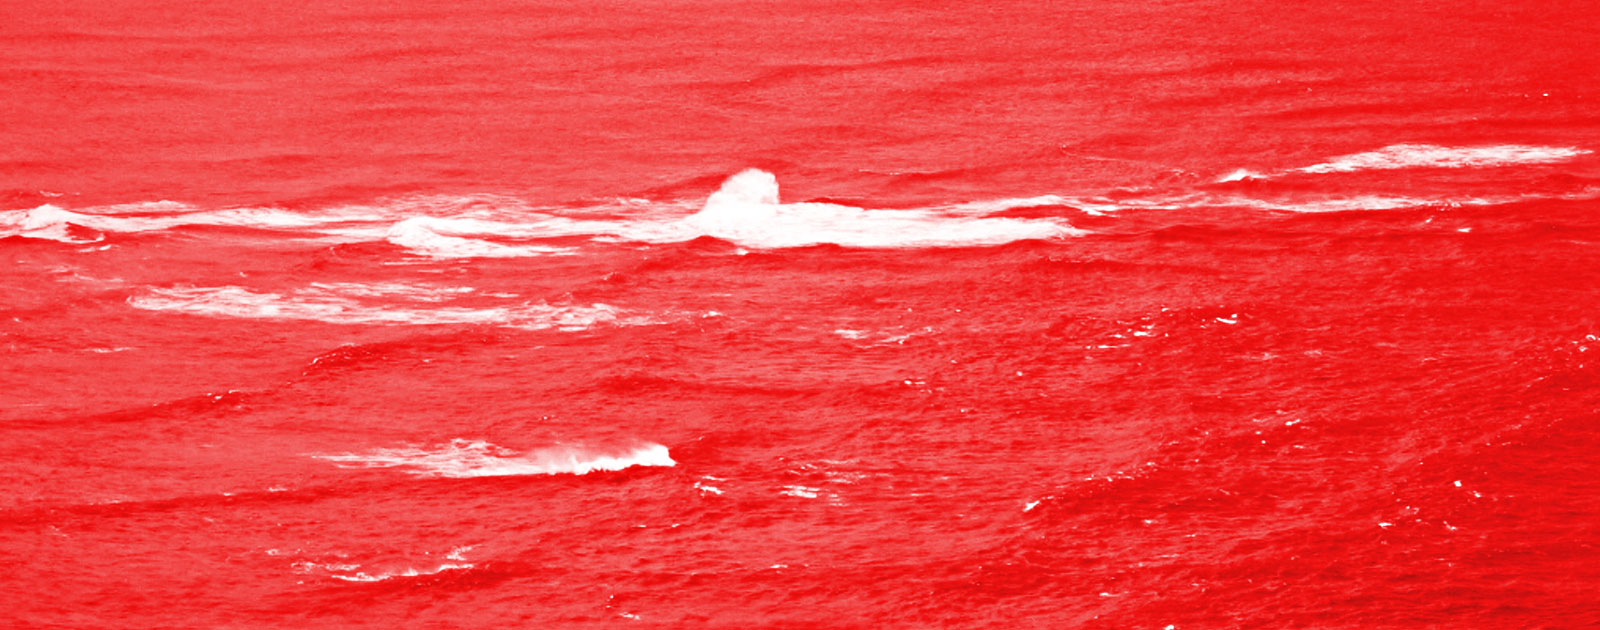 THIS BLOOD RED SEA by Anthony Hulse